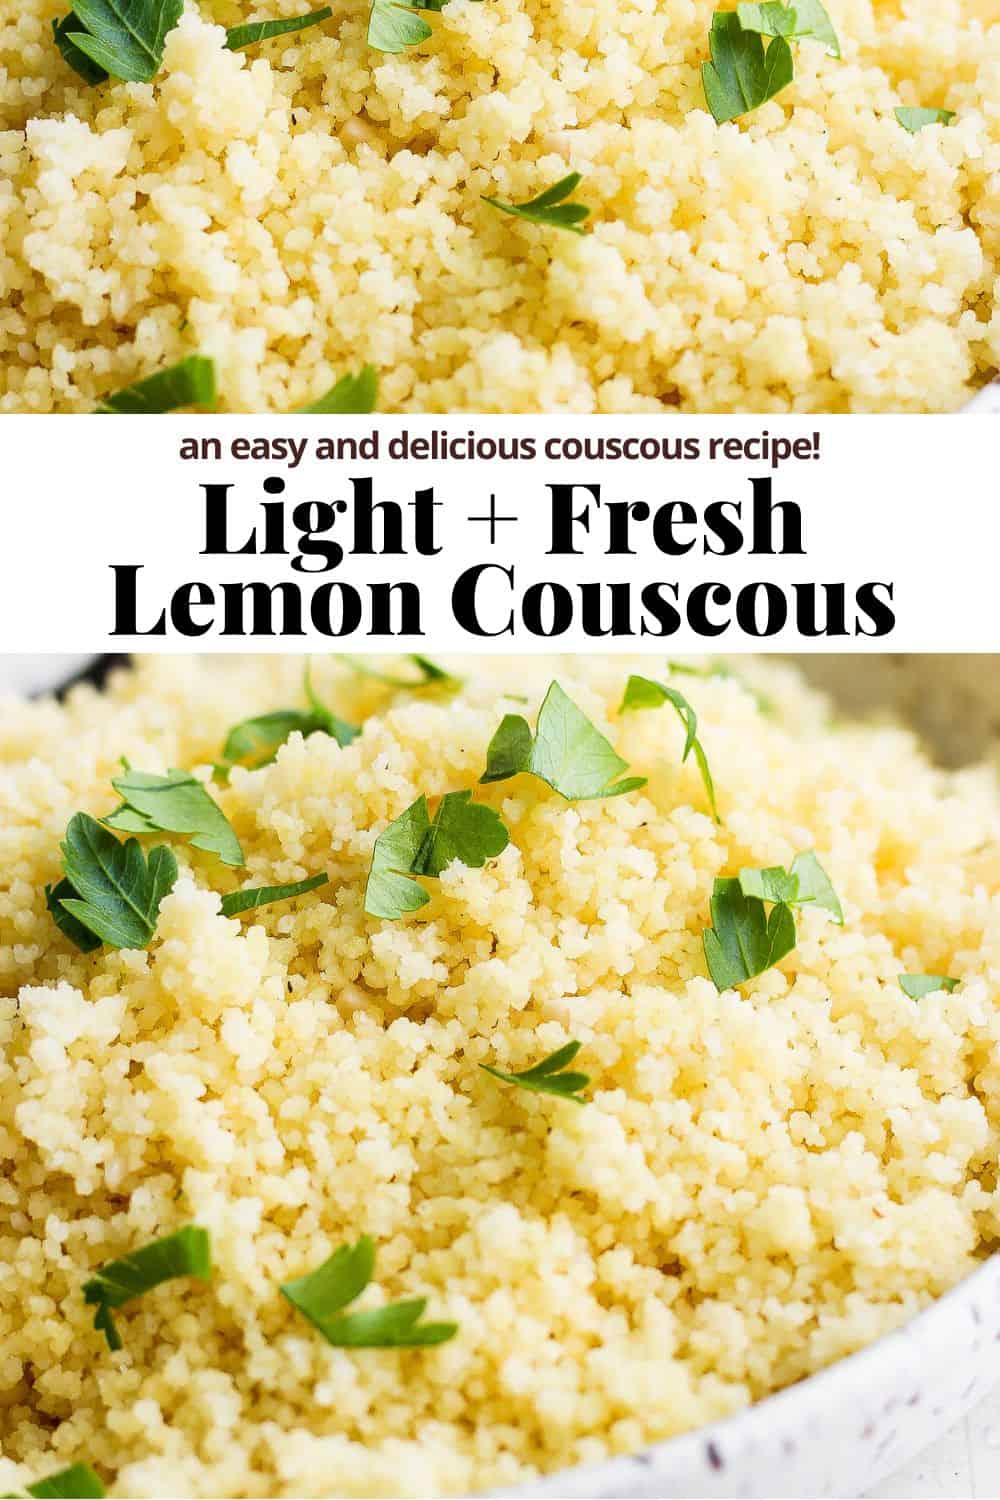 Pinterest image showing a photo of cooked couscous and the recipe title.